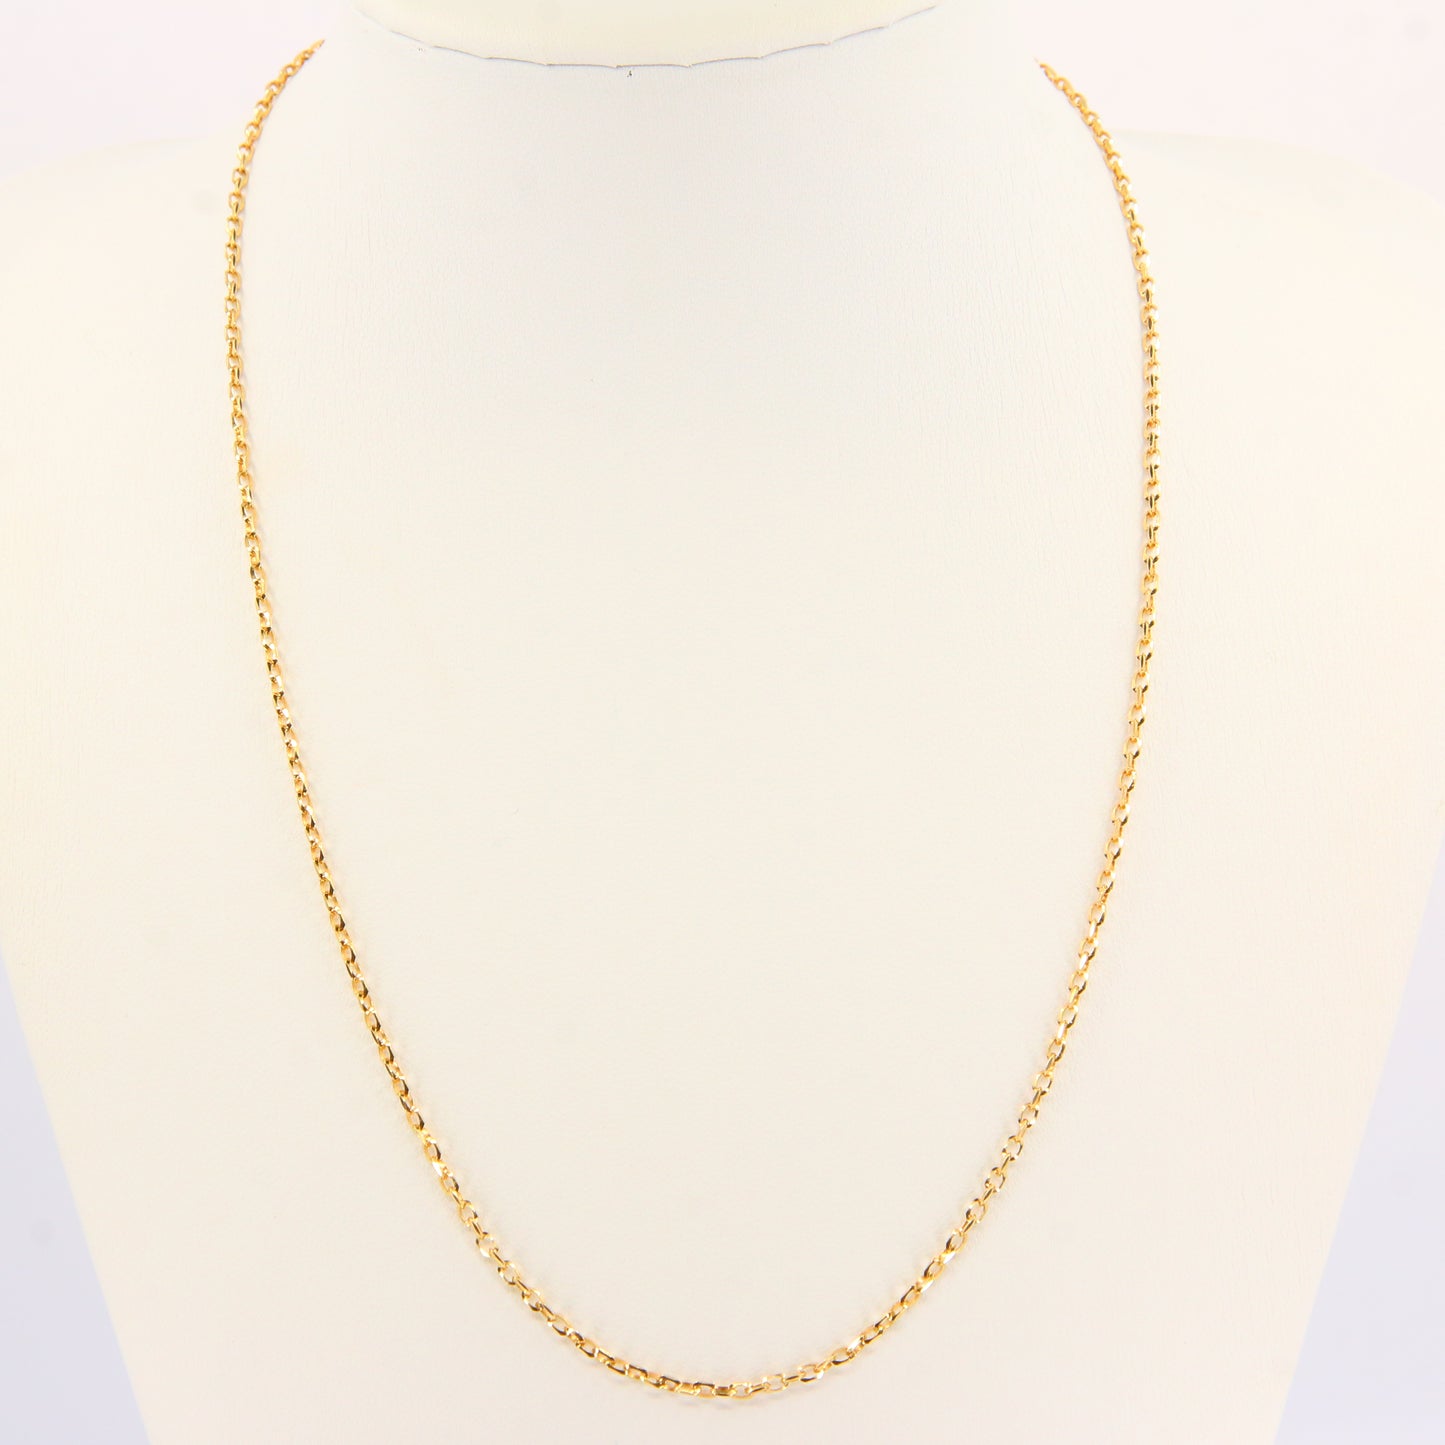 Vintage 9ct Fine Gold Necklace Oval Link Chain Necklace Gold Necklace